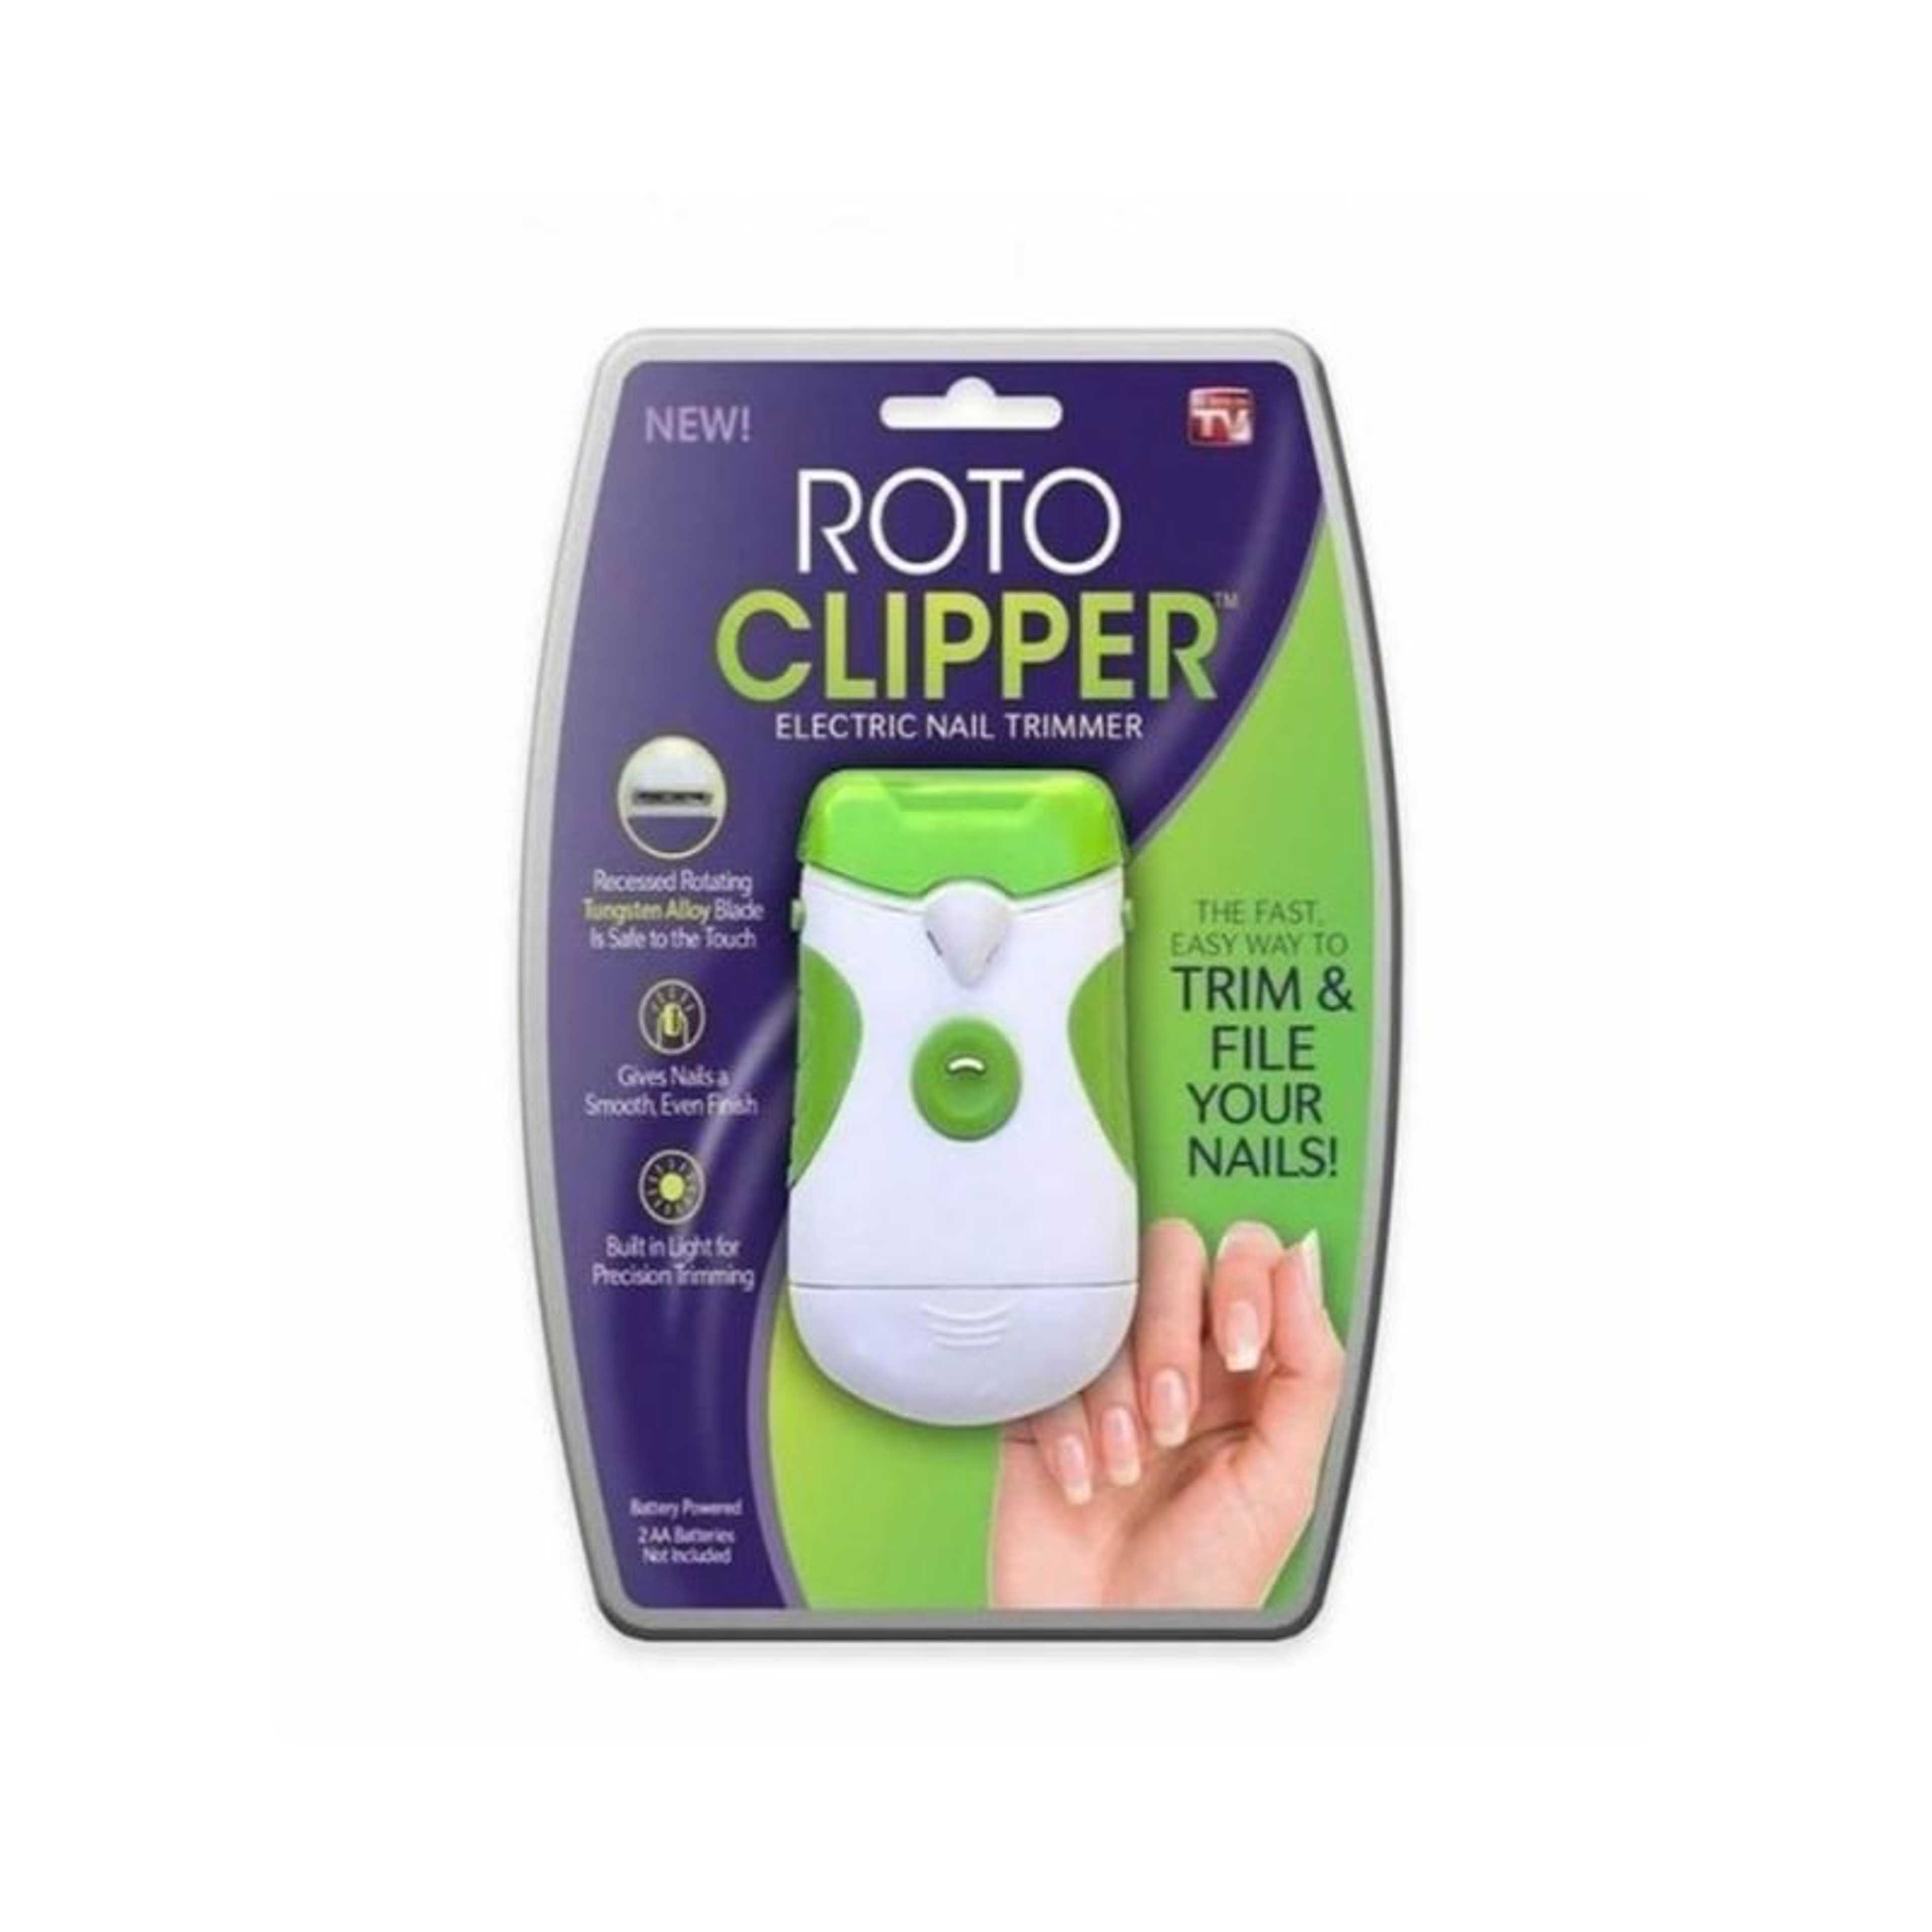 Roto Clipper Electric Nail File And Trimmer - White & Green